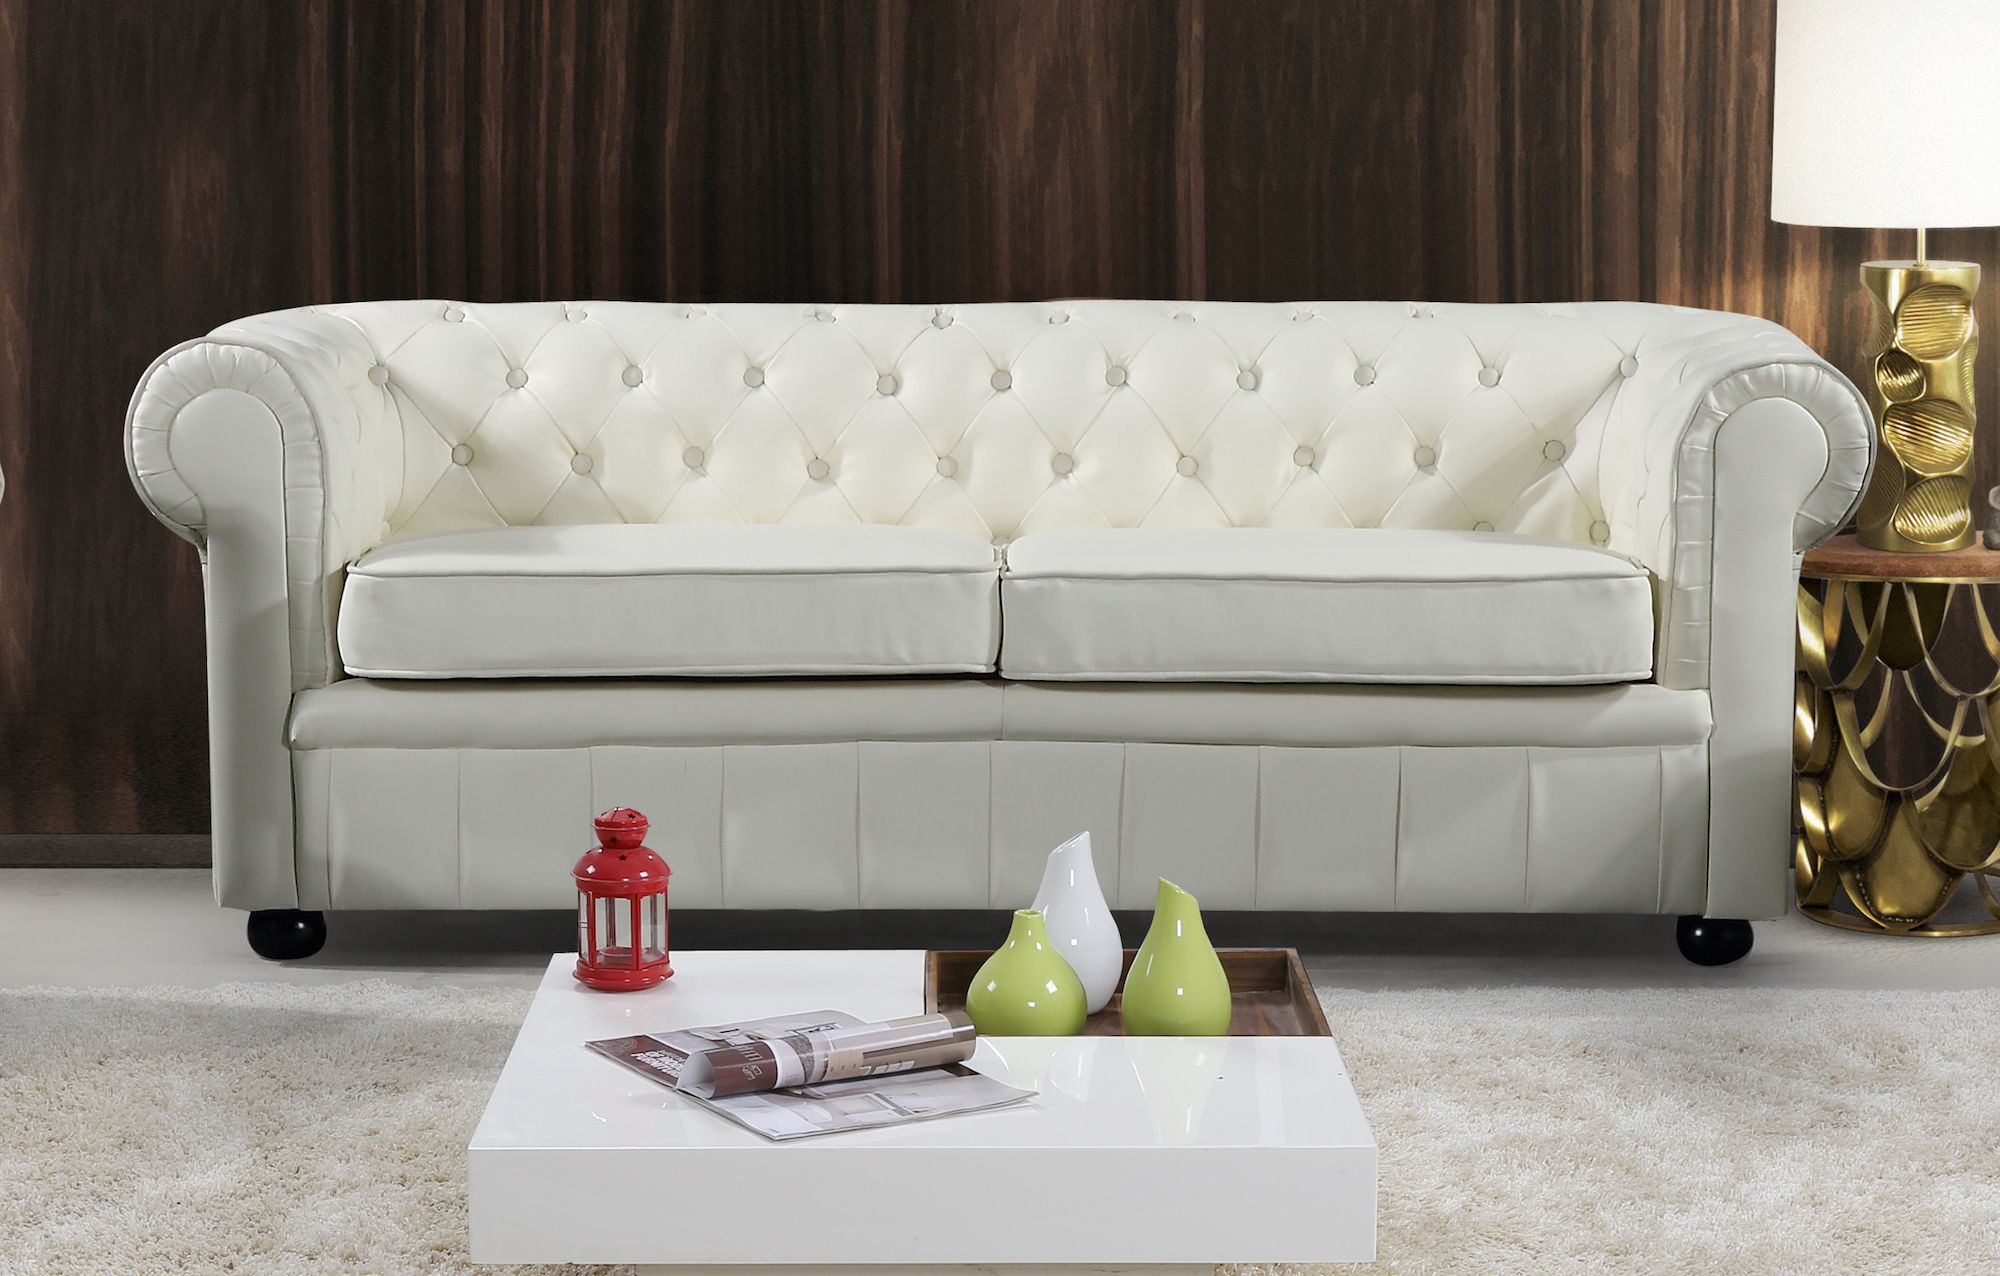 Modern Chesterfield Style Leather Sofa – Cream Leather With Sofas In Cream (View 13 of 20)